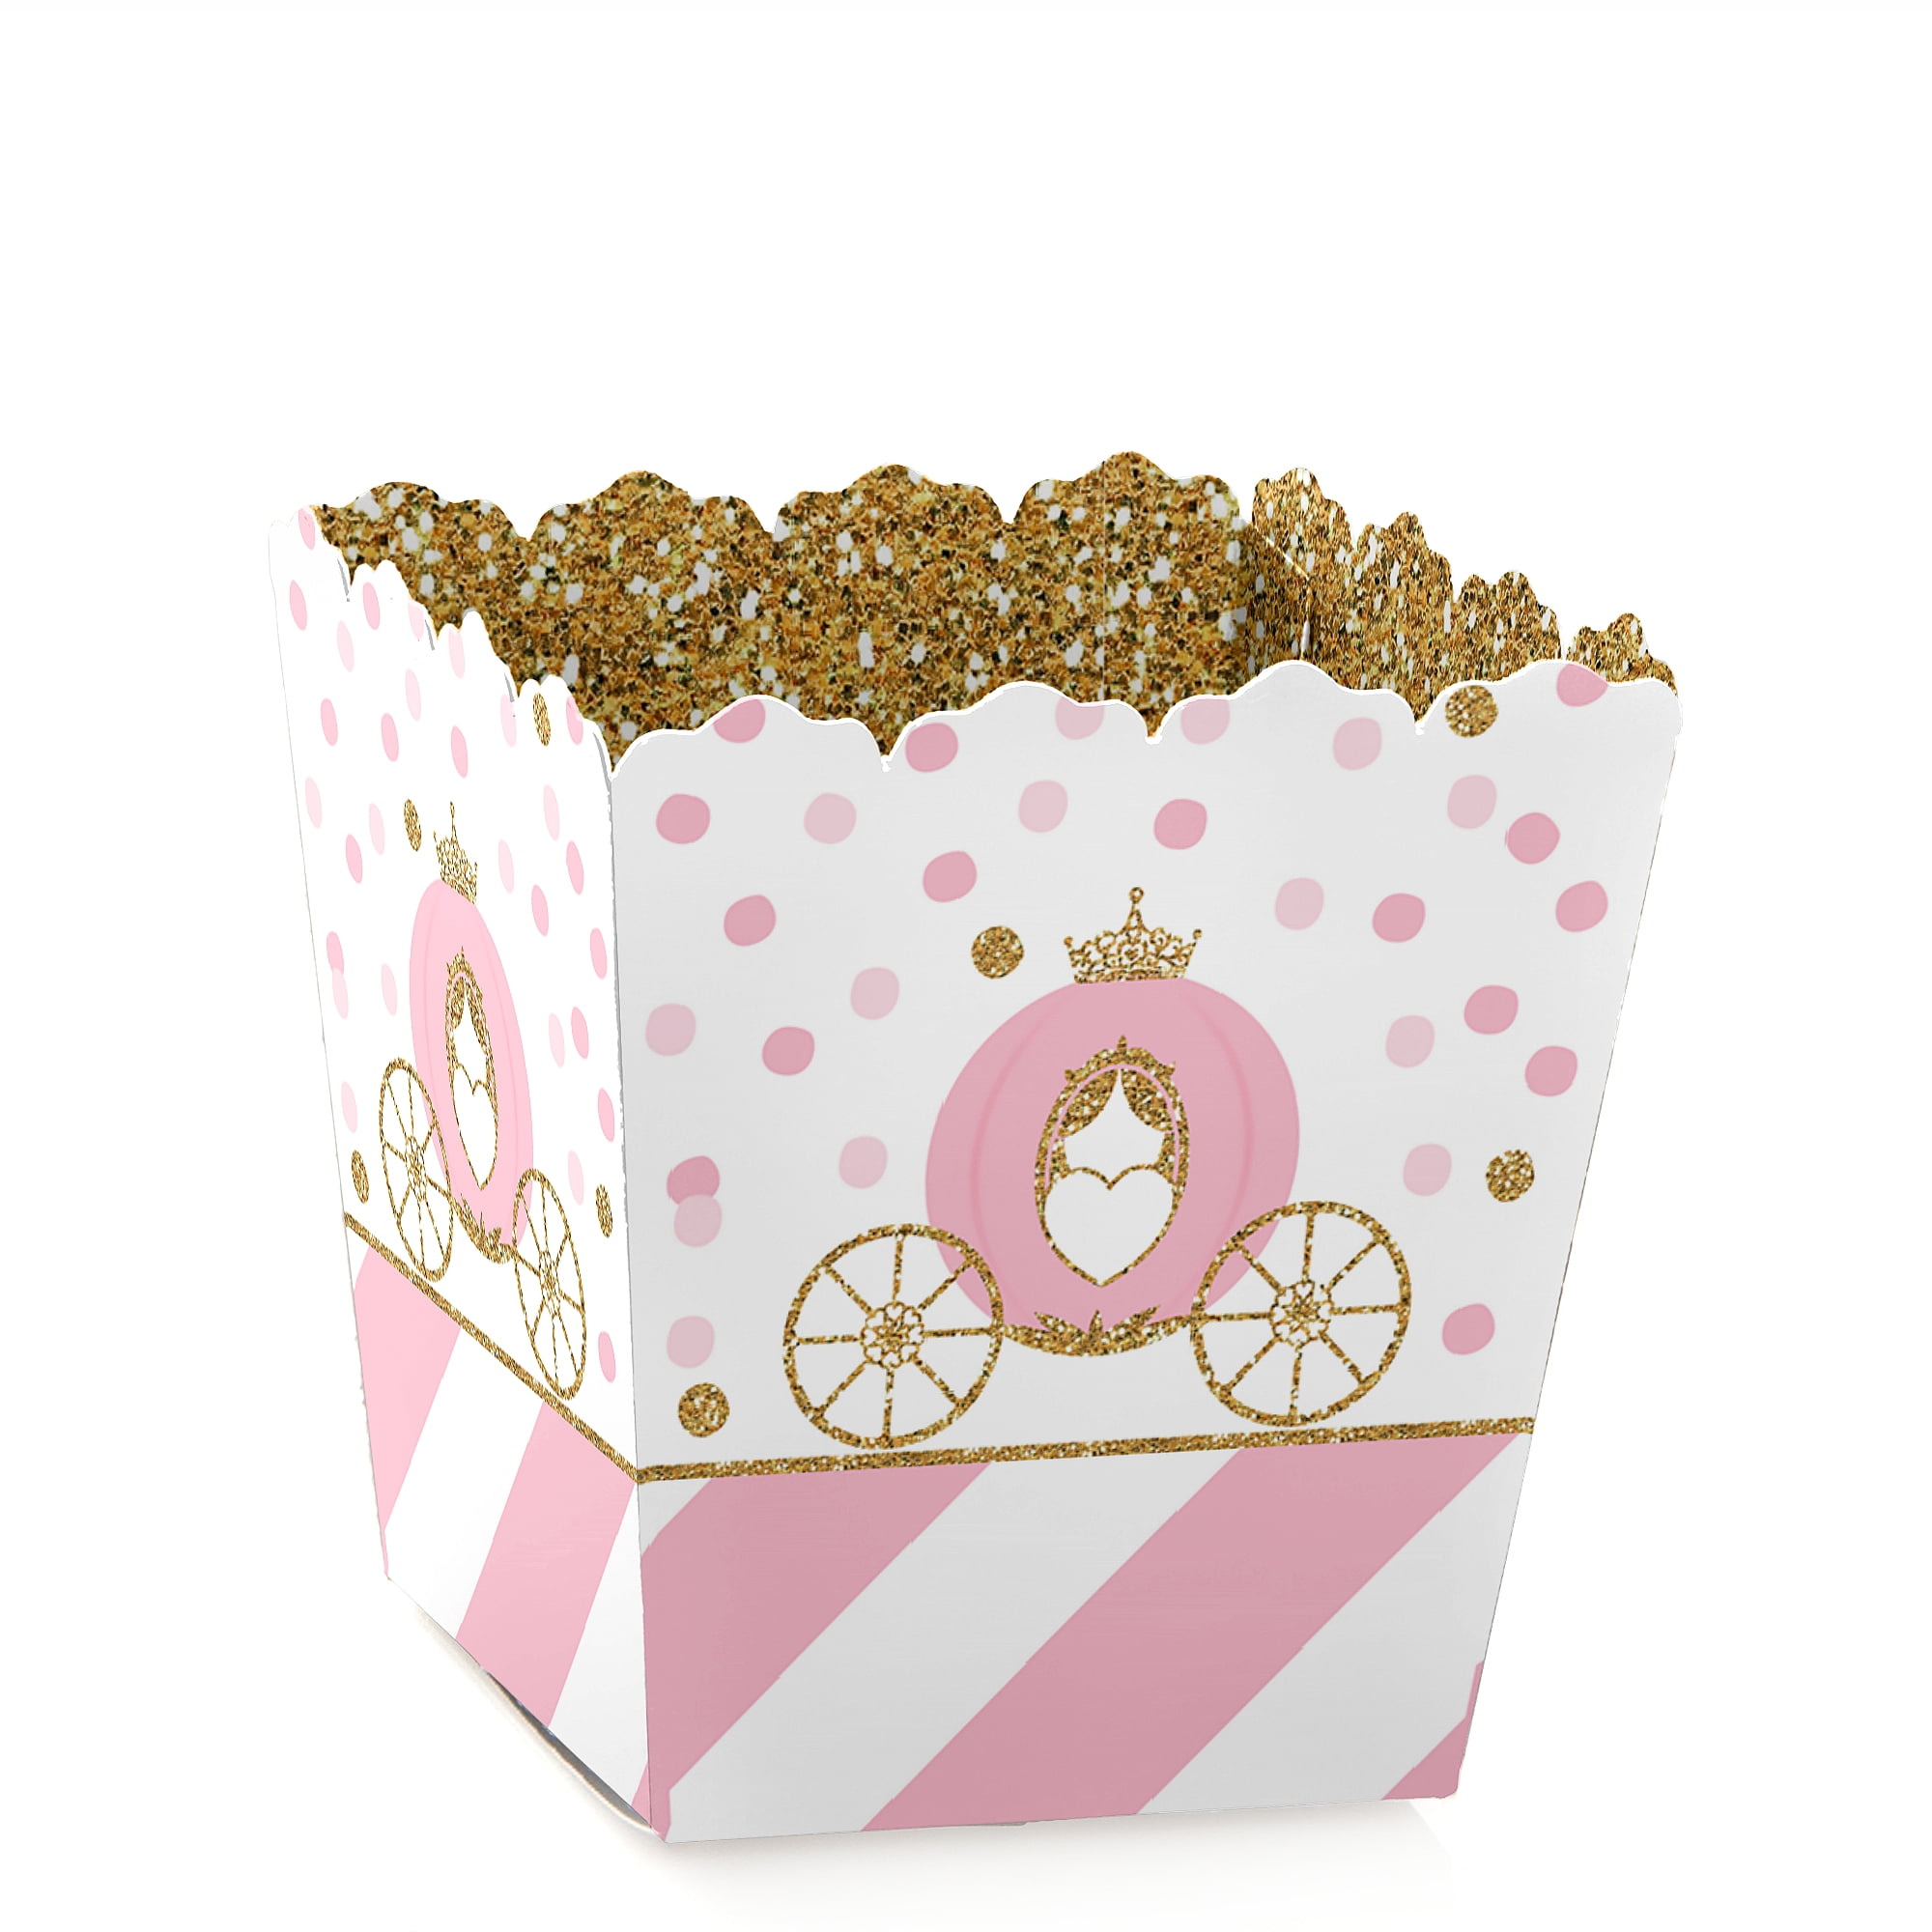 Little Princess Crown Favor Gift Boxes Set of 20 Pink and Gold Princess Baby Shower or Birthday Party Petite Pillow Boxes